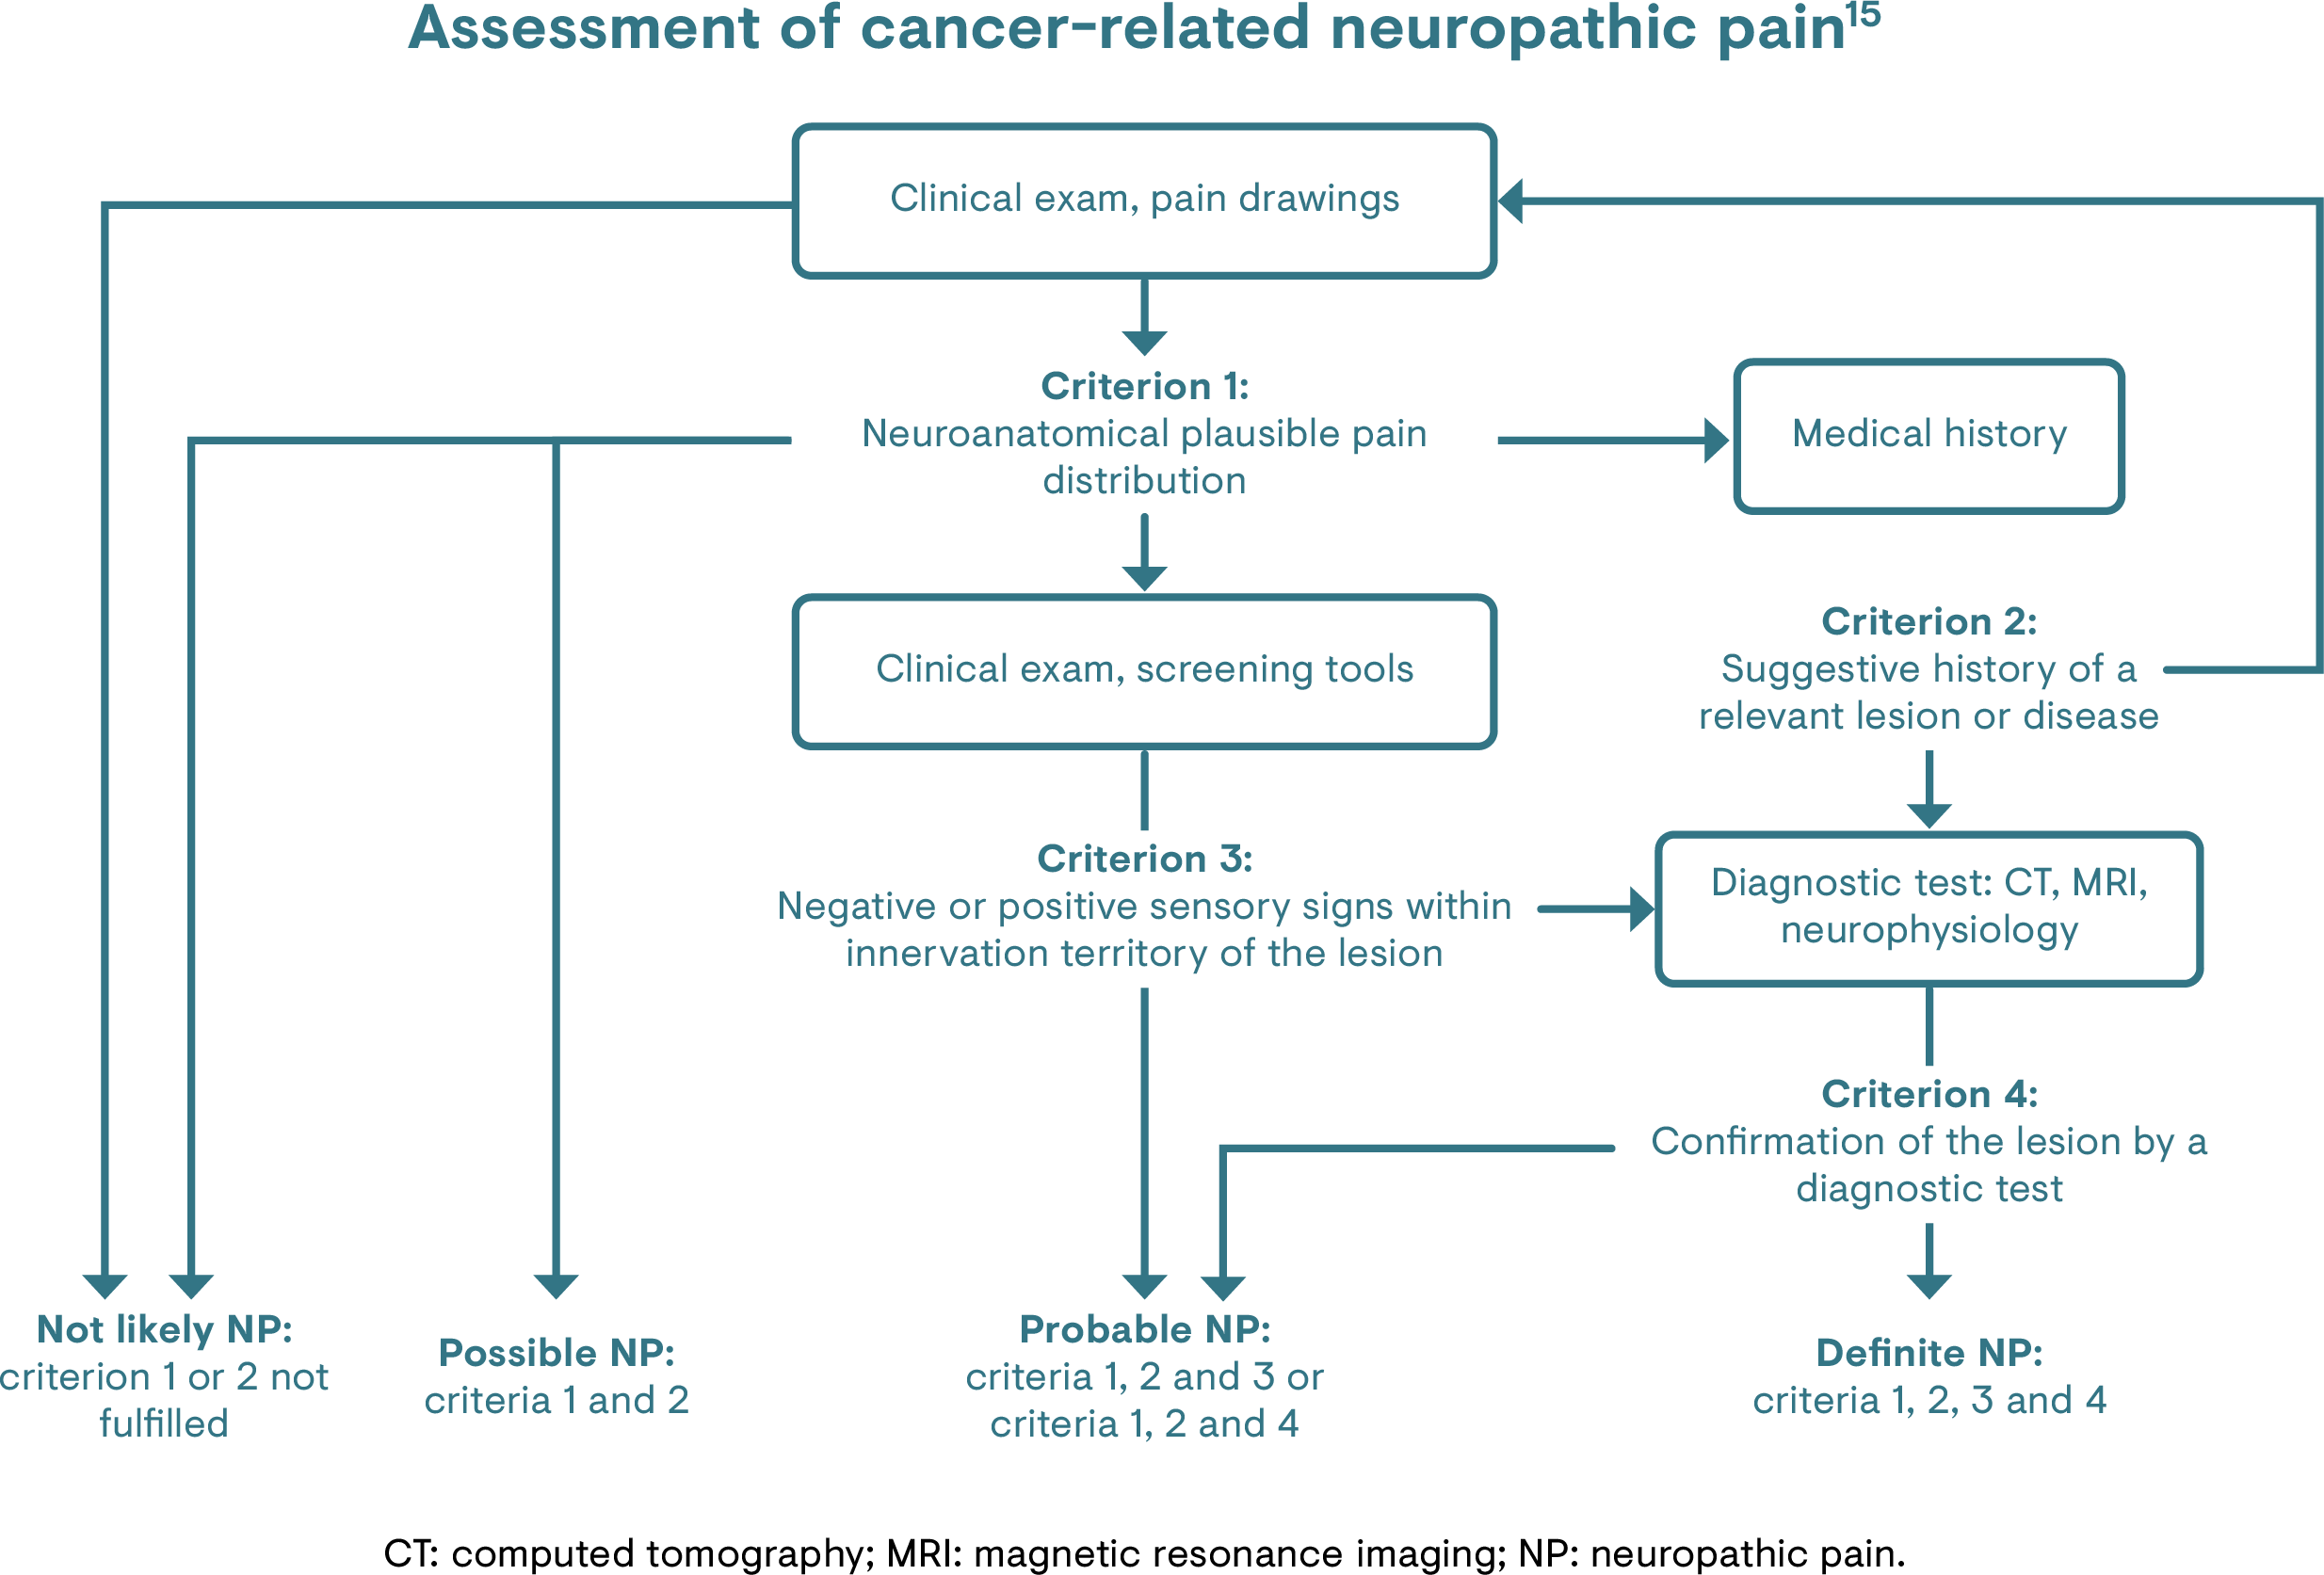 Flowchart of steps involved in assessment of cancer-related neuropathic pain (CRNP)